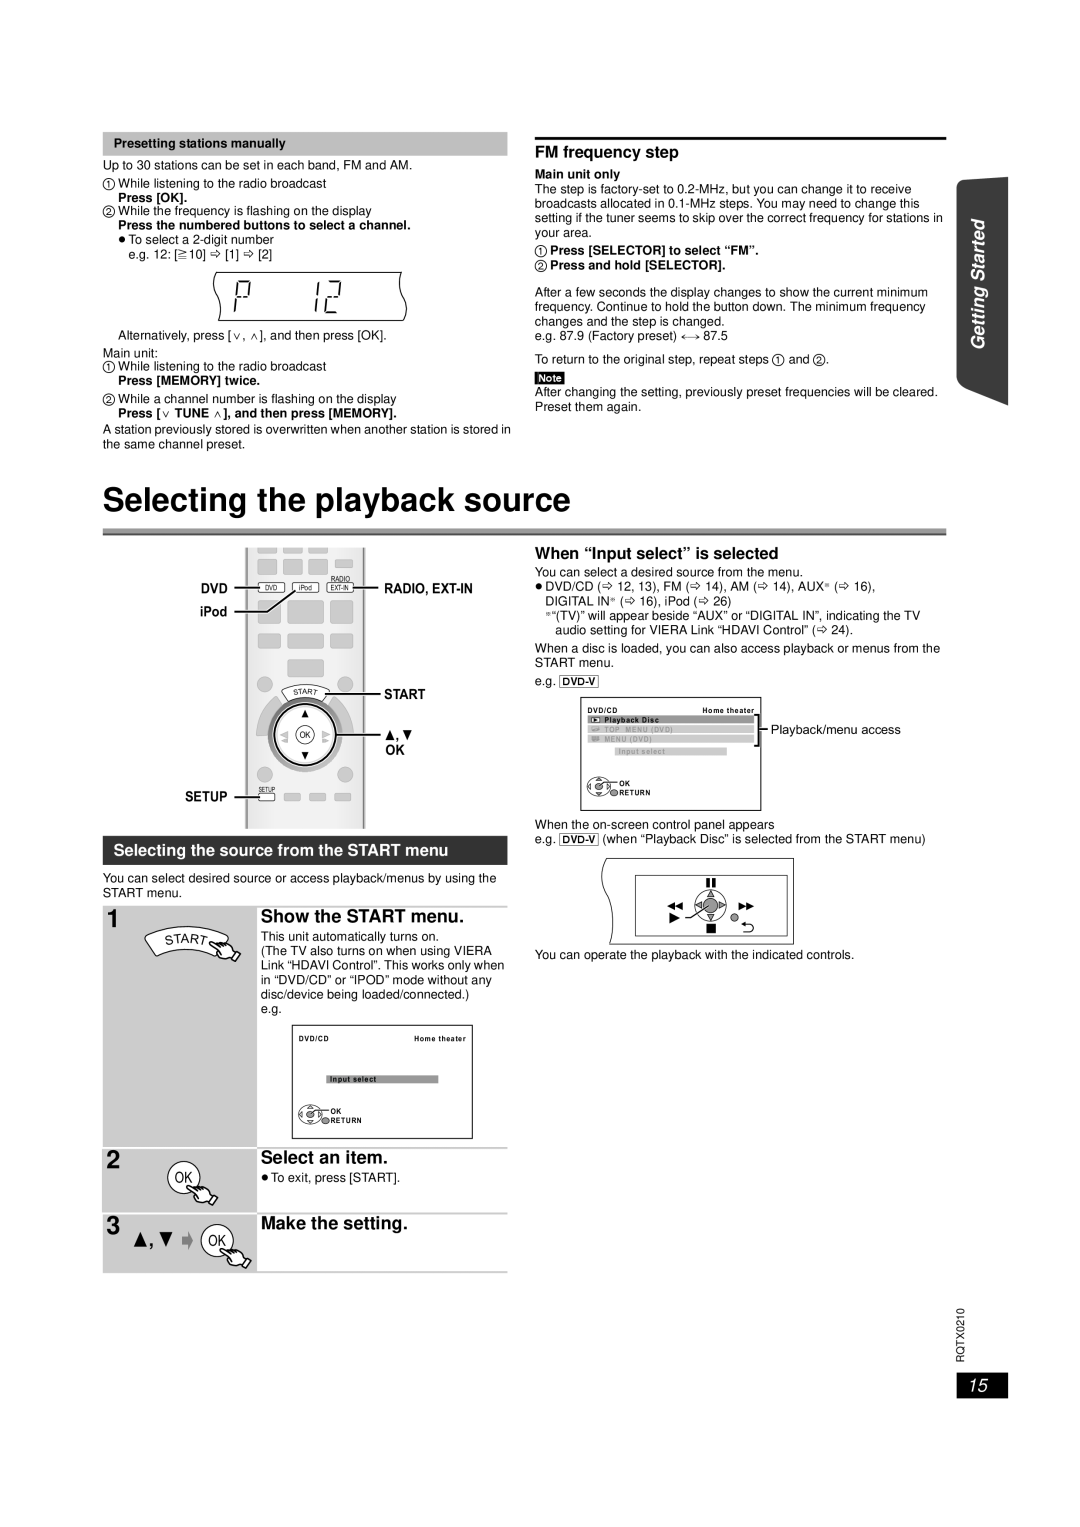 Panasonic SC-PT673 Selecting the playback source, Getting Started Discs, Playing, Operations, Other, FM frequency step 